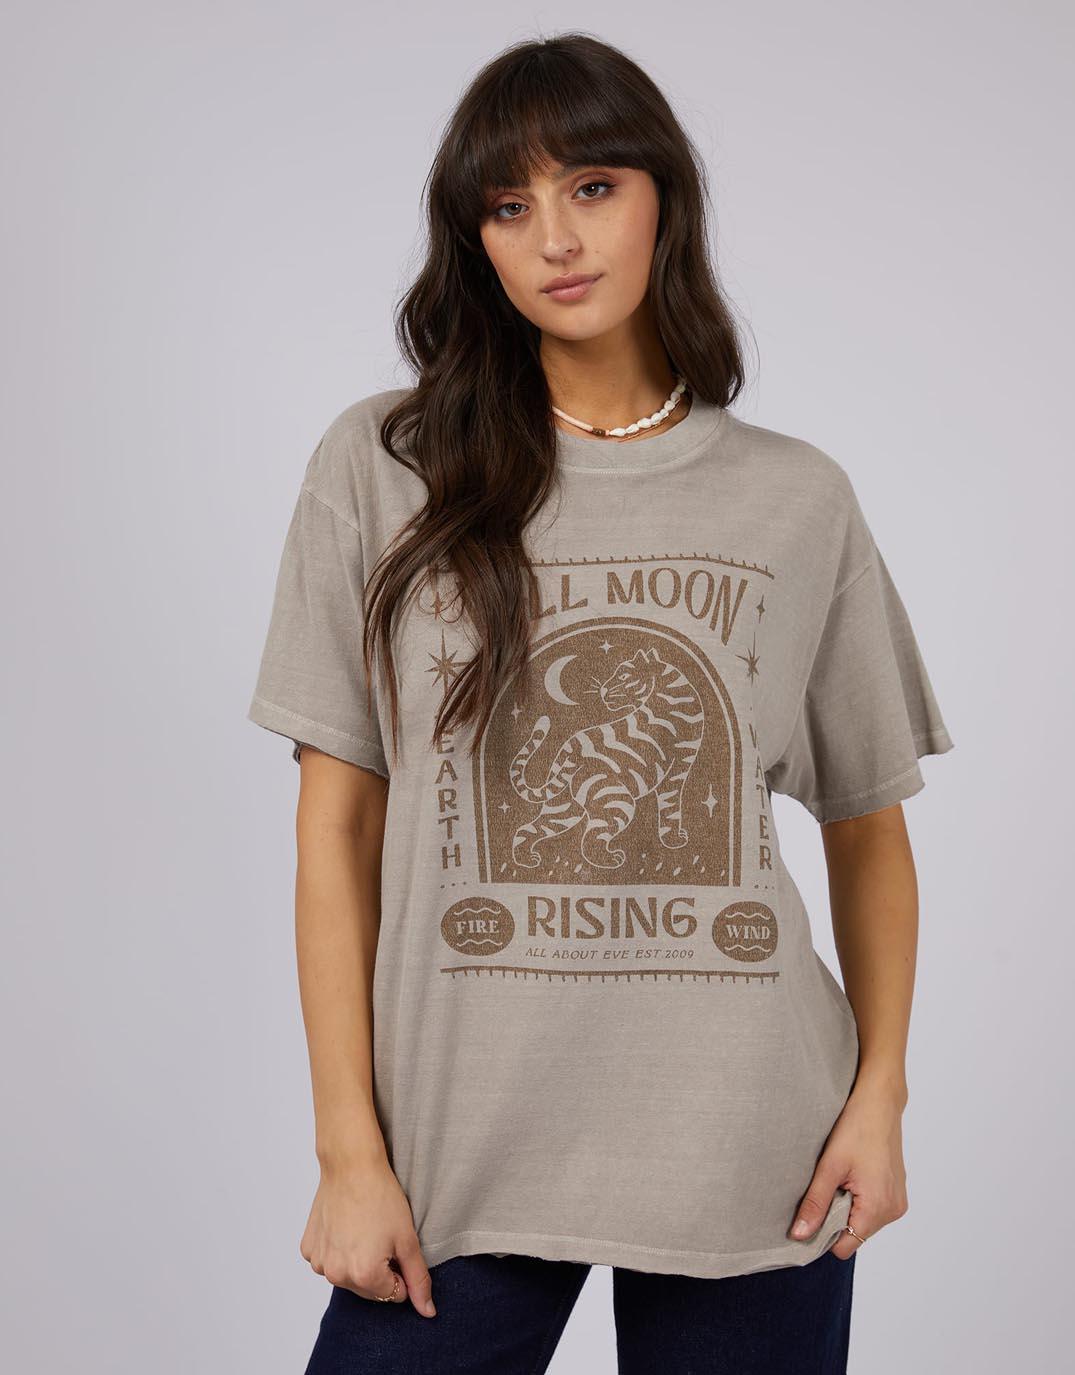 All About Eve - Rising Tee - Grey - White & Co Living Tees & Tanks